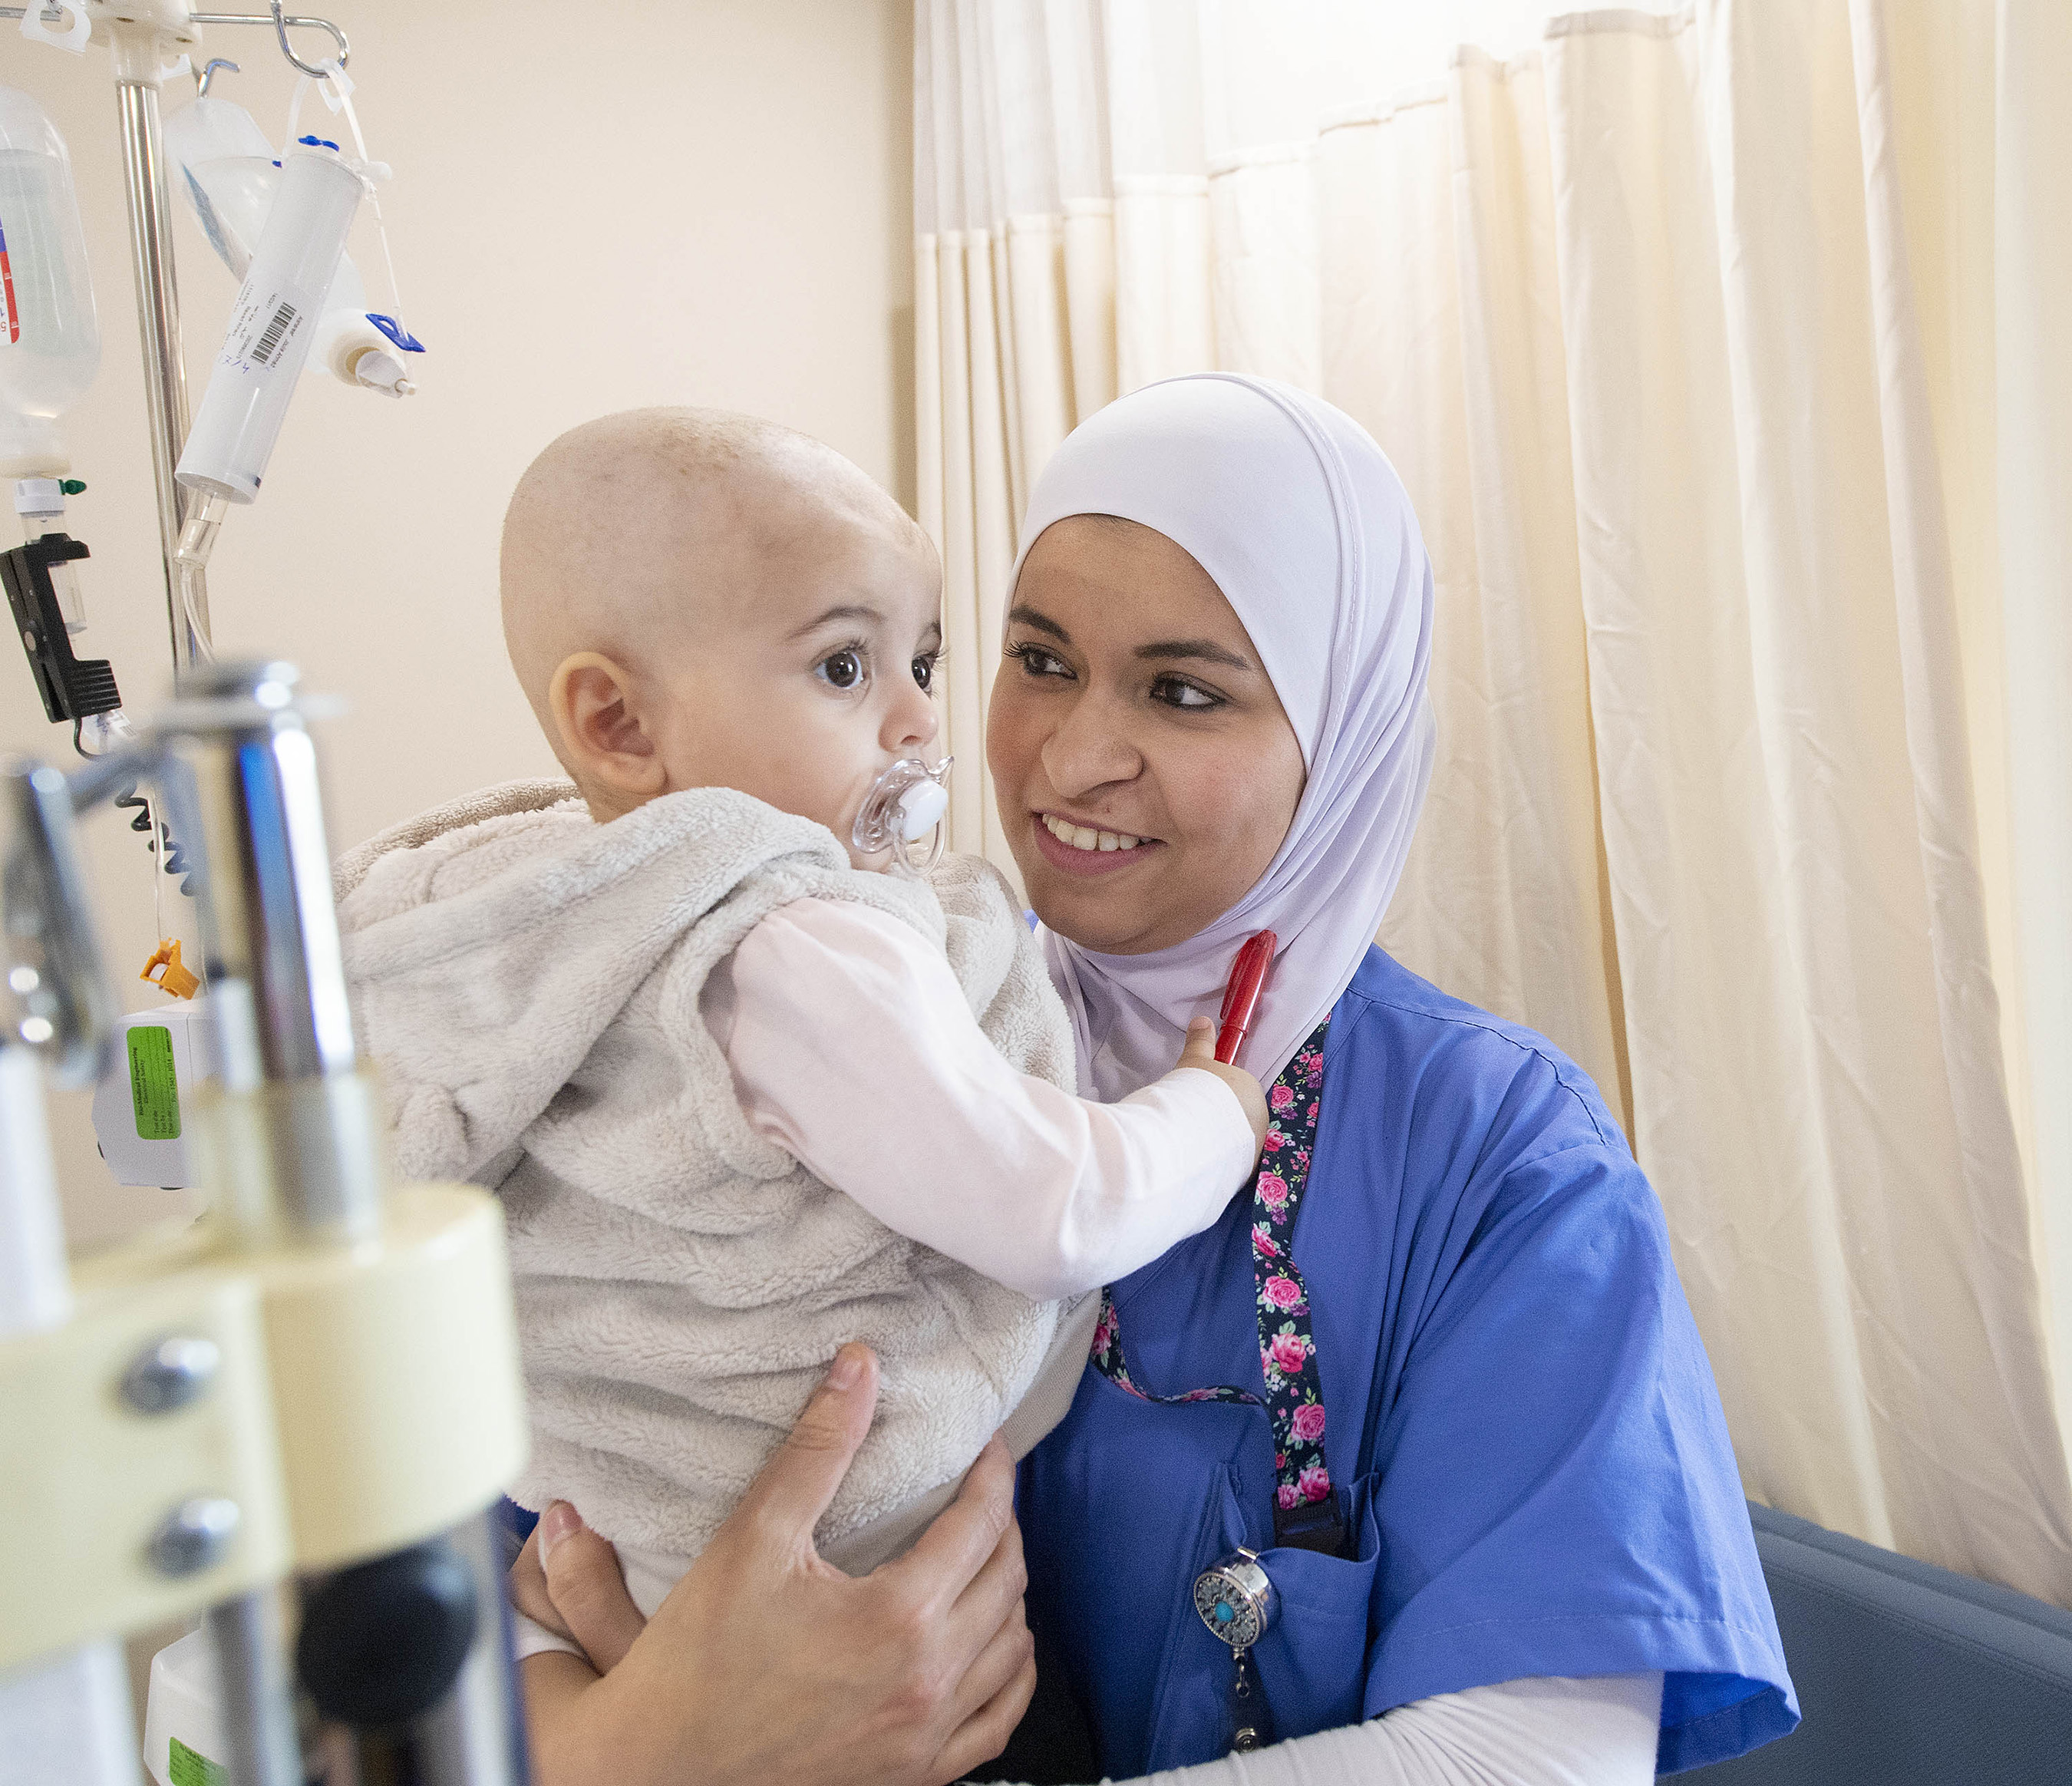 This patient and nurse were photographed in King Hussein Cancer Center in Amman, Jordan, a St. Jude Global partner site that has seen immense success with retinoblastoma cure rates for patients. Please credit St. Jude Children’s Research Hospital for use of this photo.